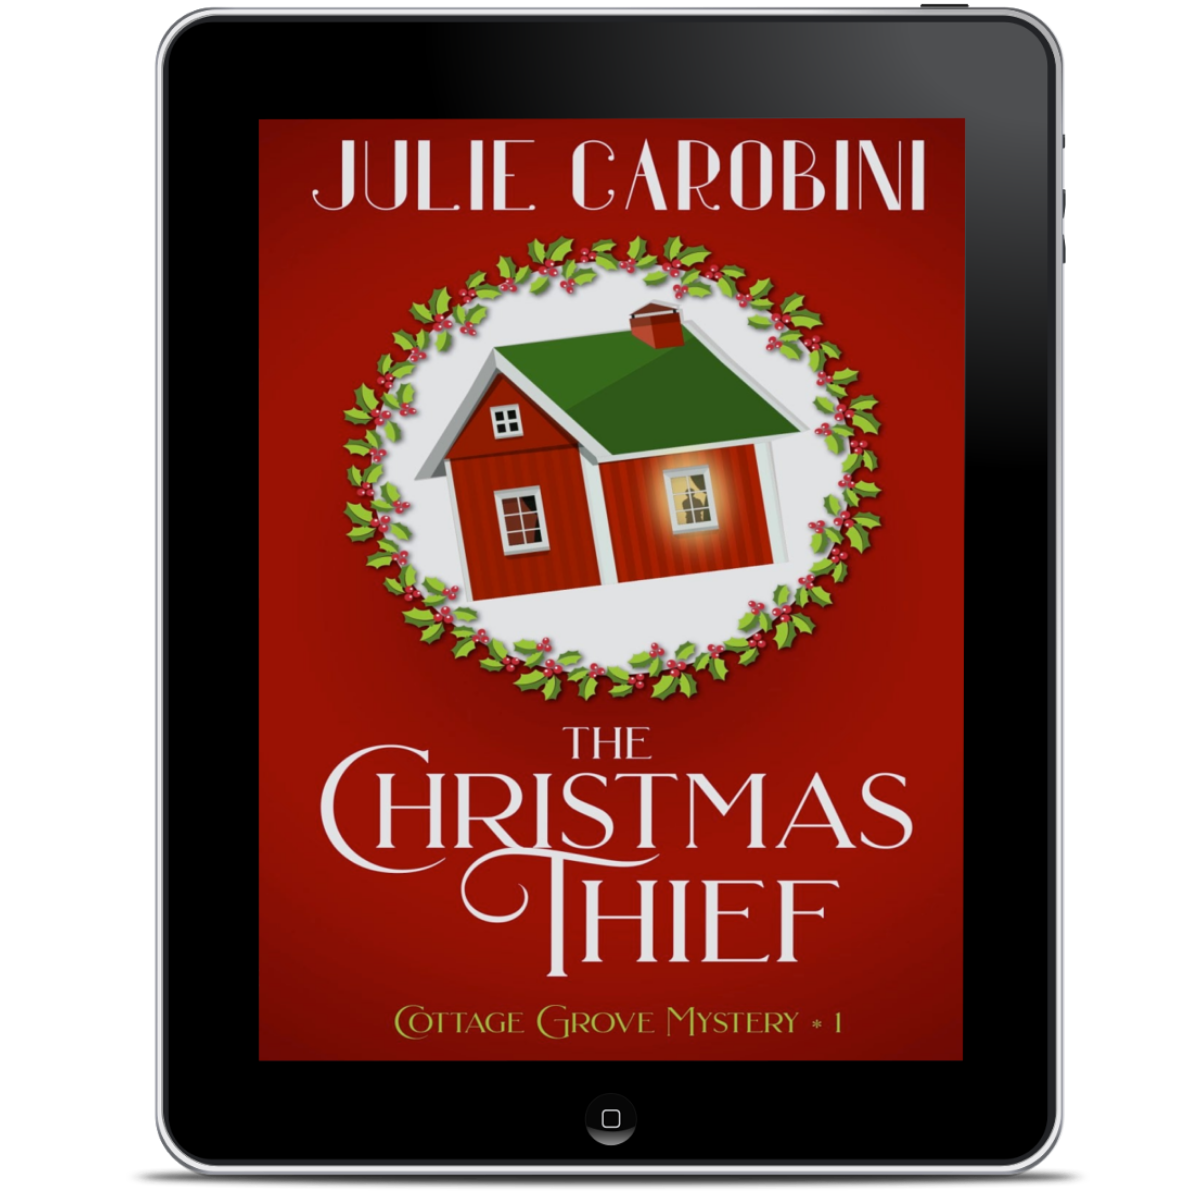 The Christmas Thief (Cottage Grove Mysteries #1) EBOOK